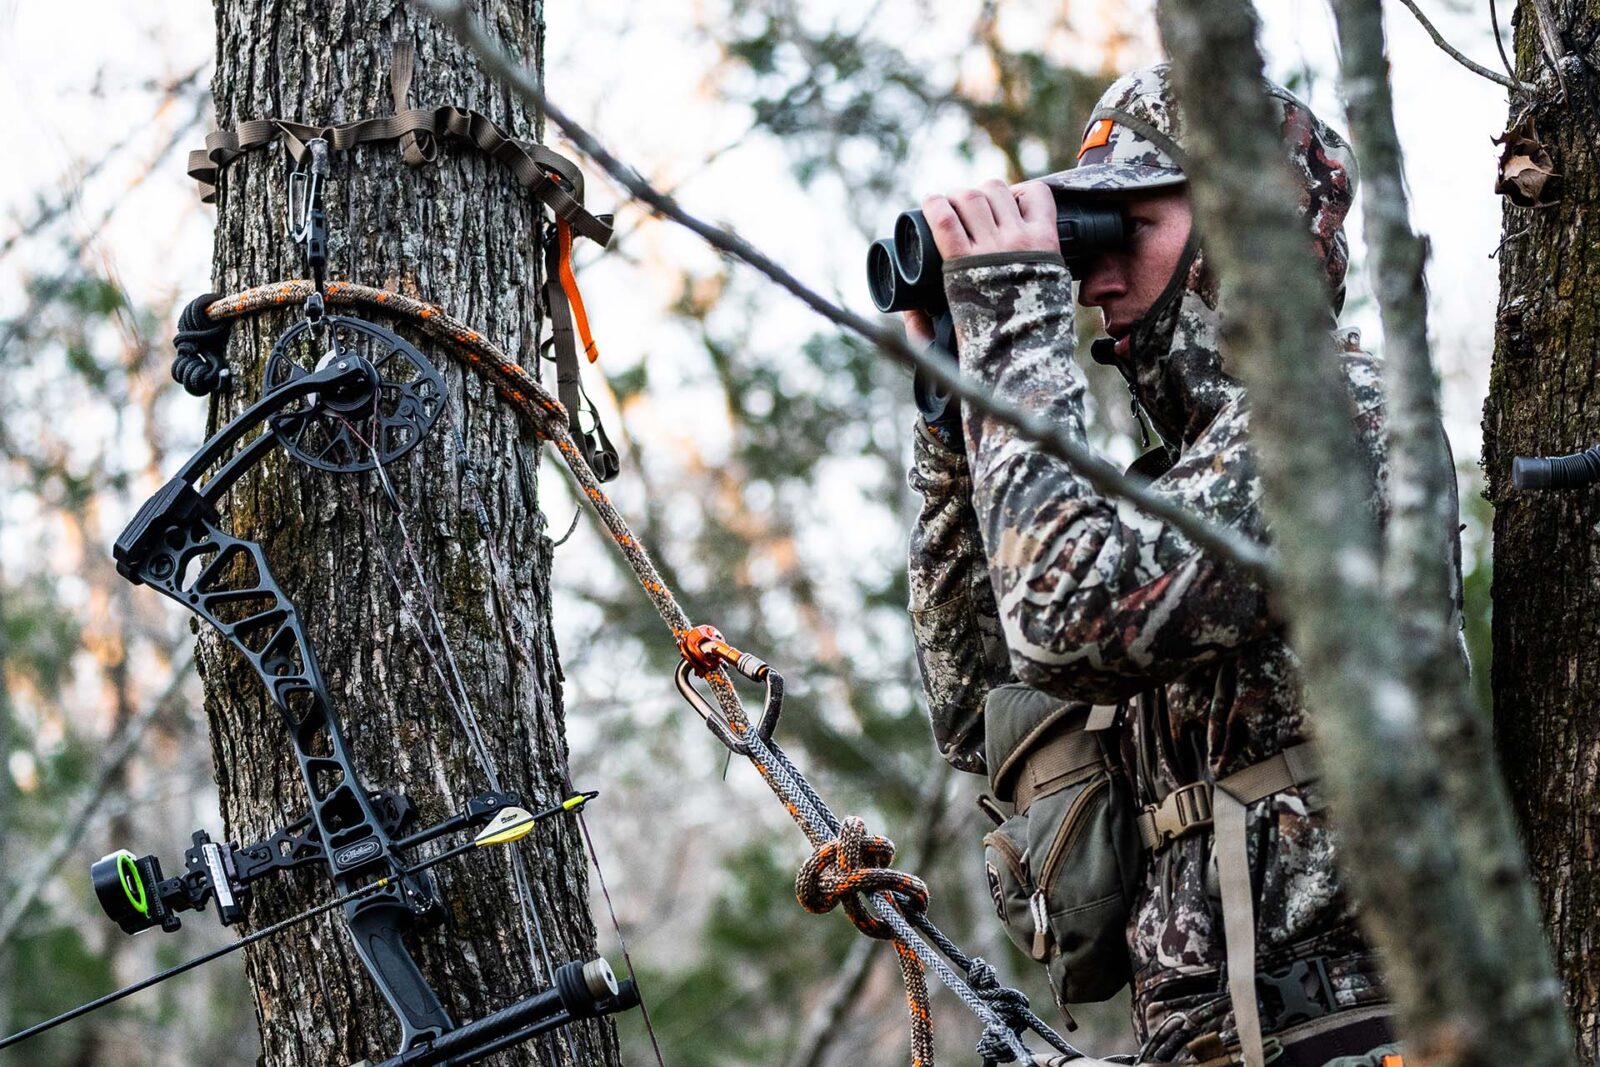 a hunter with binoculars in a treestand with ropes and pulleys holding his gear 